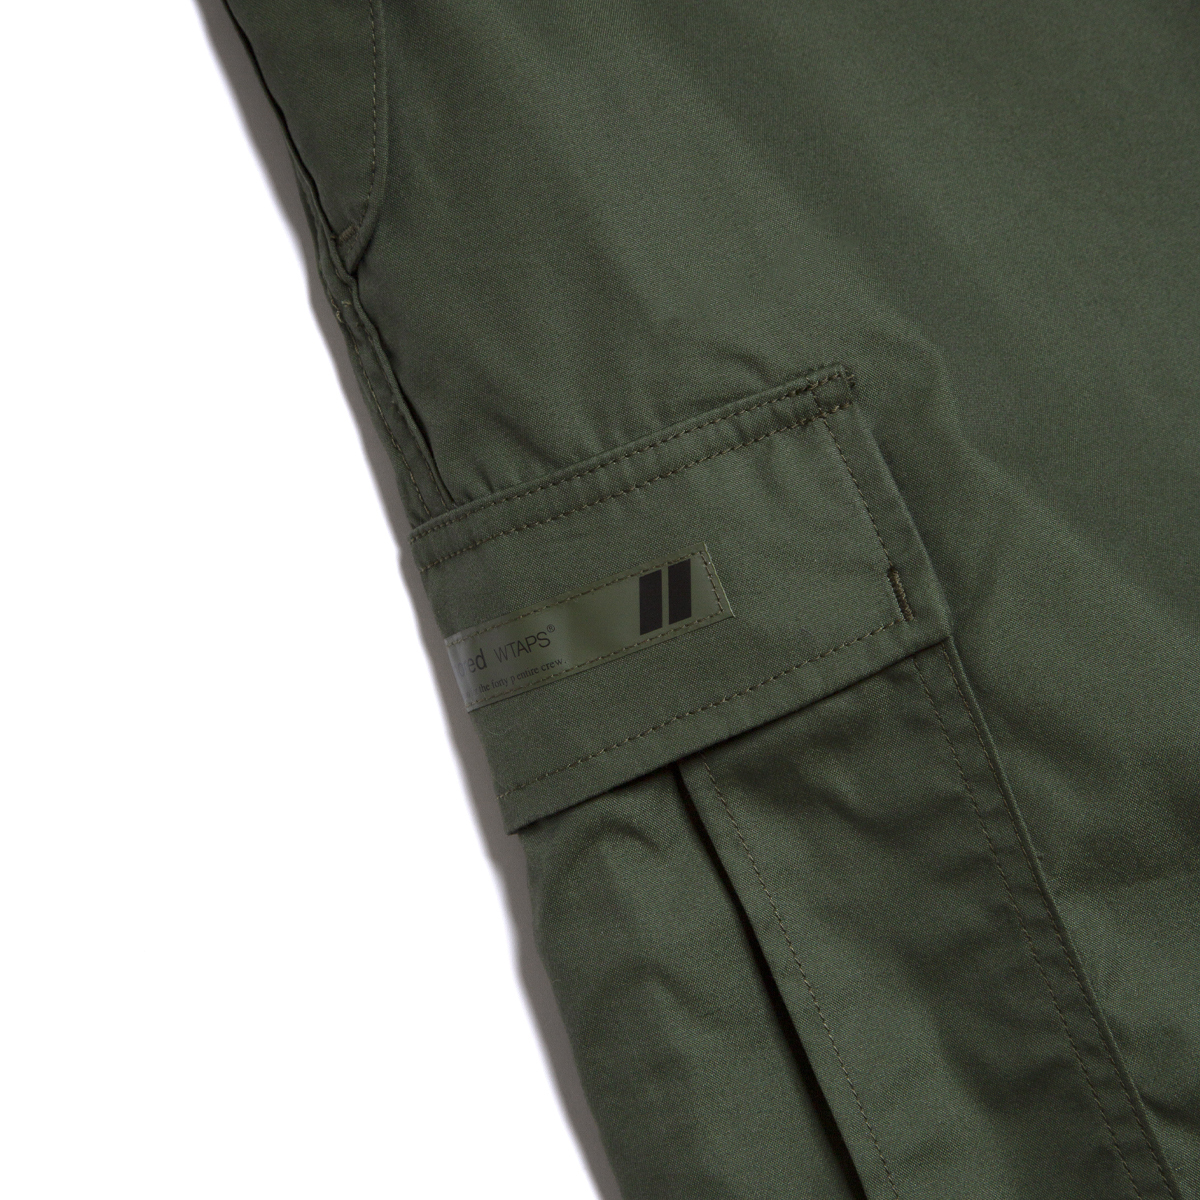 WTAPS : MILT0001 / TROUSERS / NYCO. OXFORD – BELIEF MOSCOW